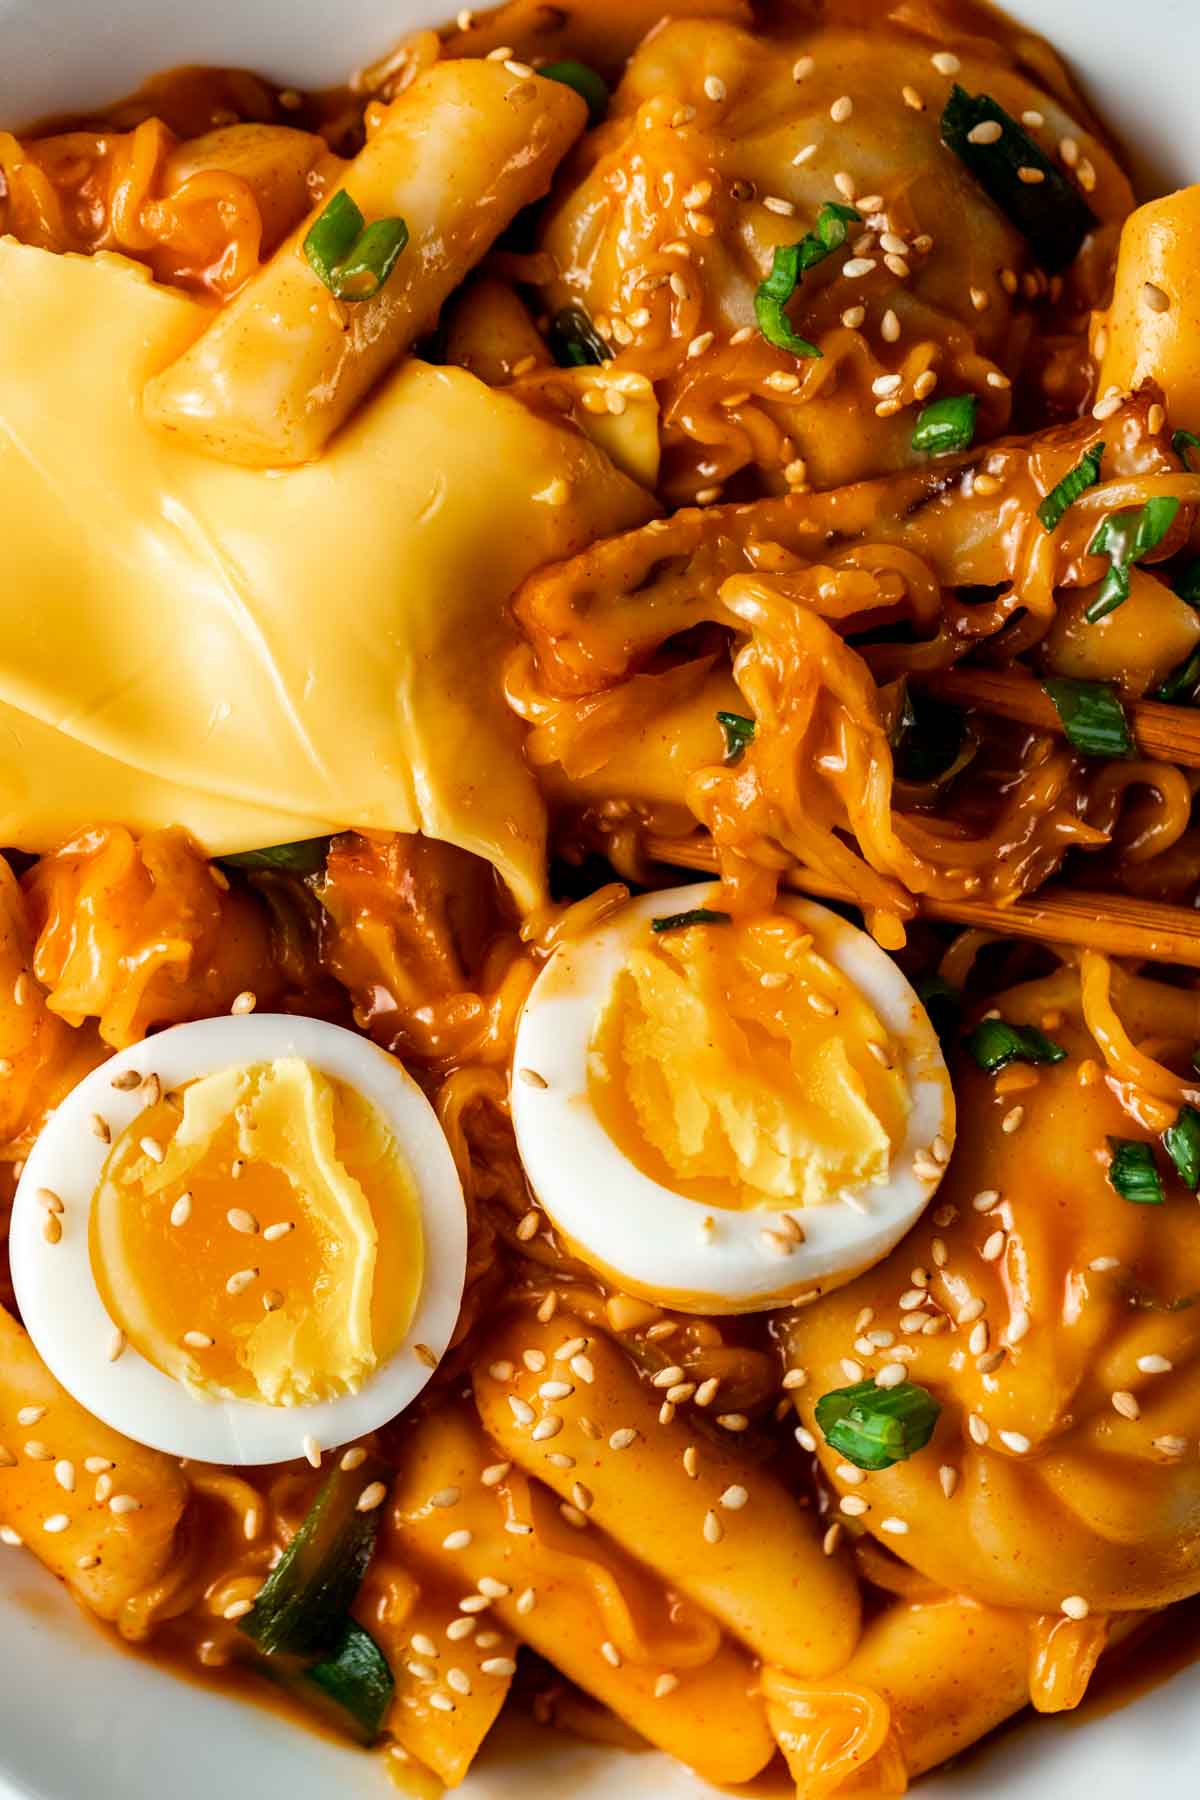 noodles in an orange sauce with American cheese on top